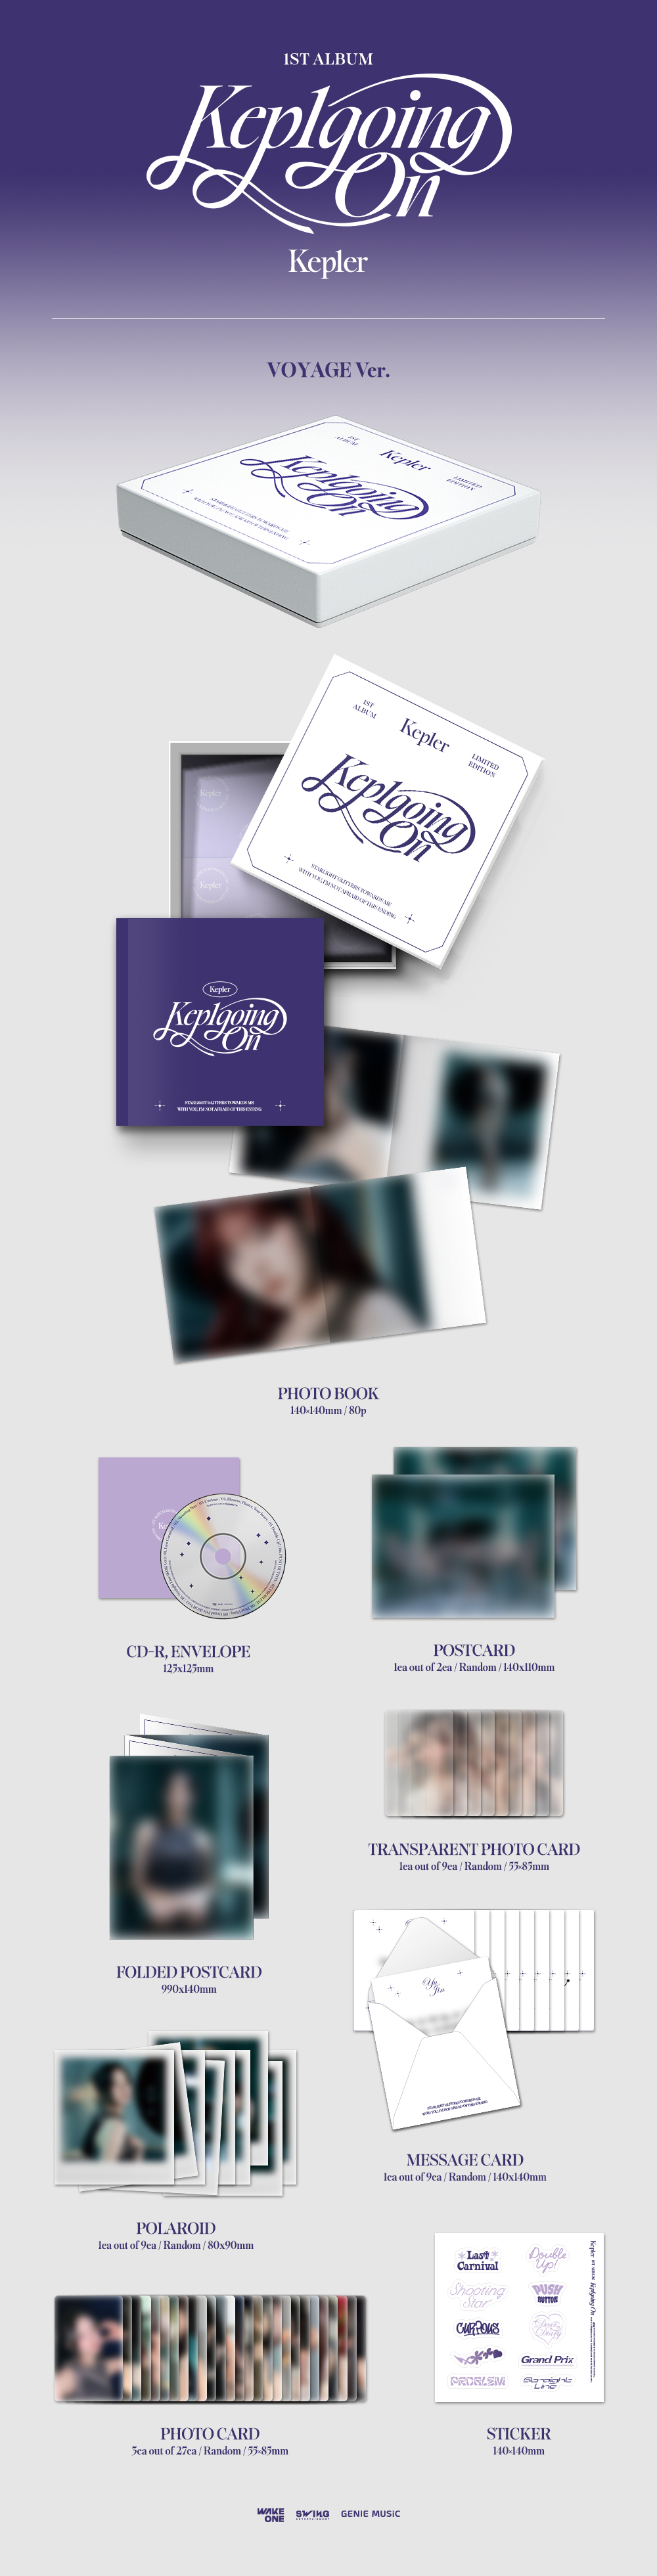 Kep1er 1st Album [Kep1going On] (Limited Edition VOYAGE Ver 